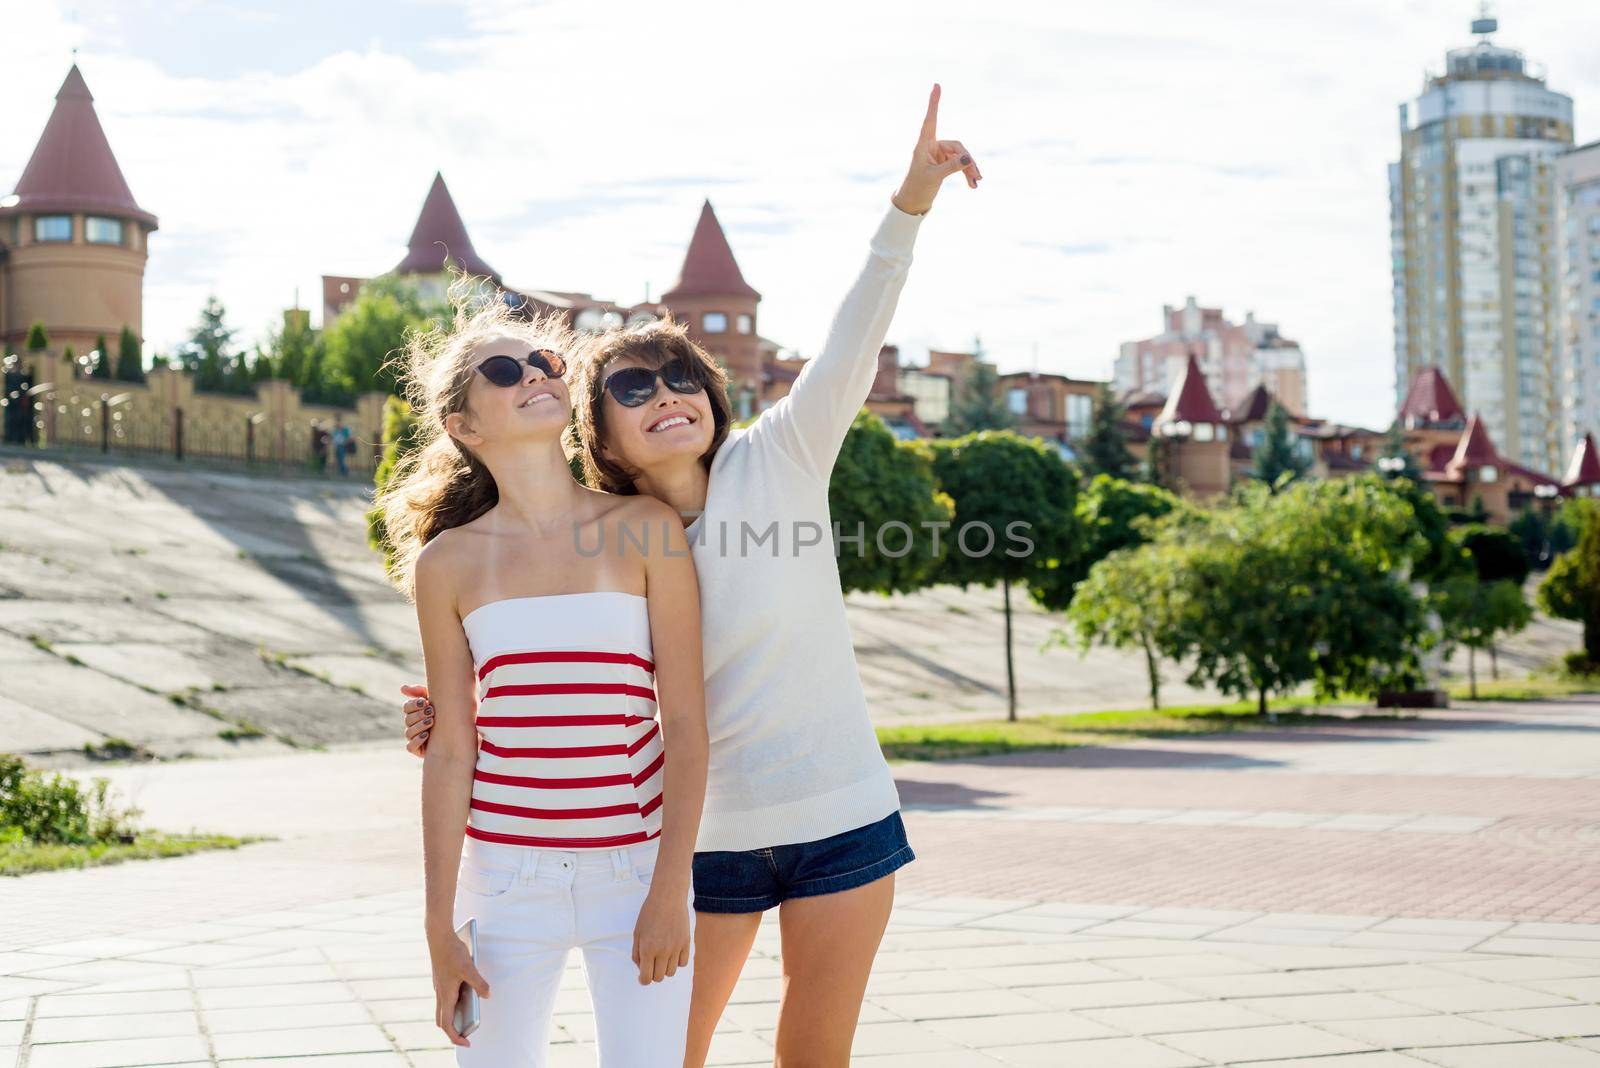 Communication between the mother and the teen daughter. City sunset background.